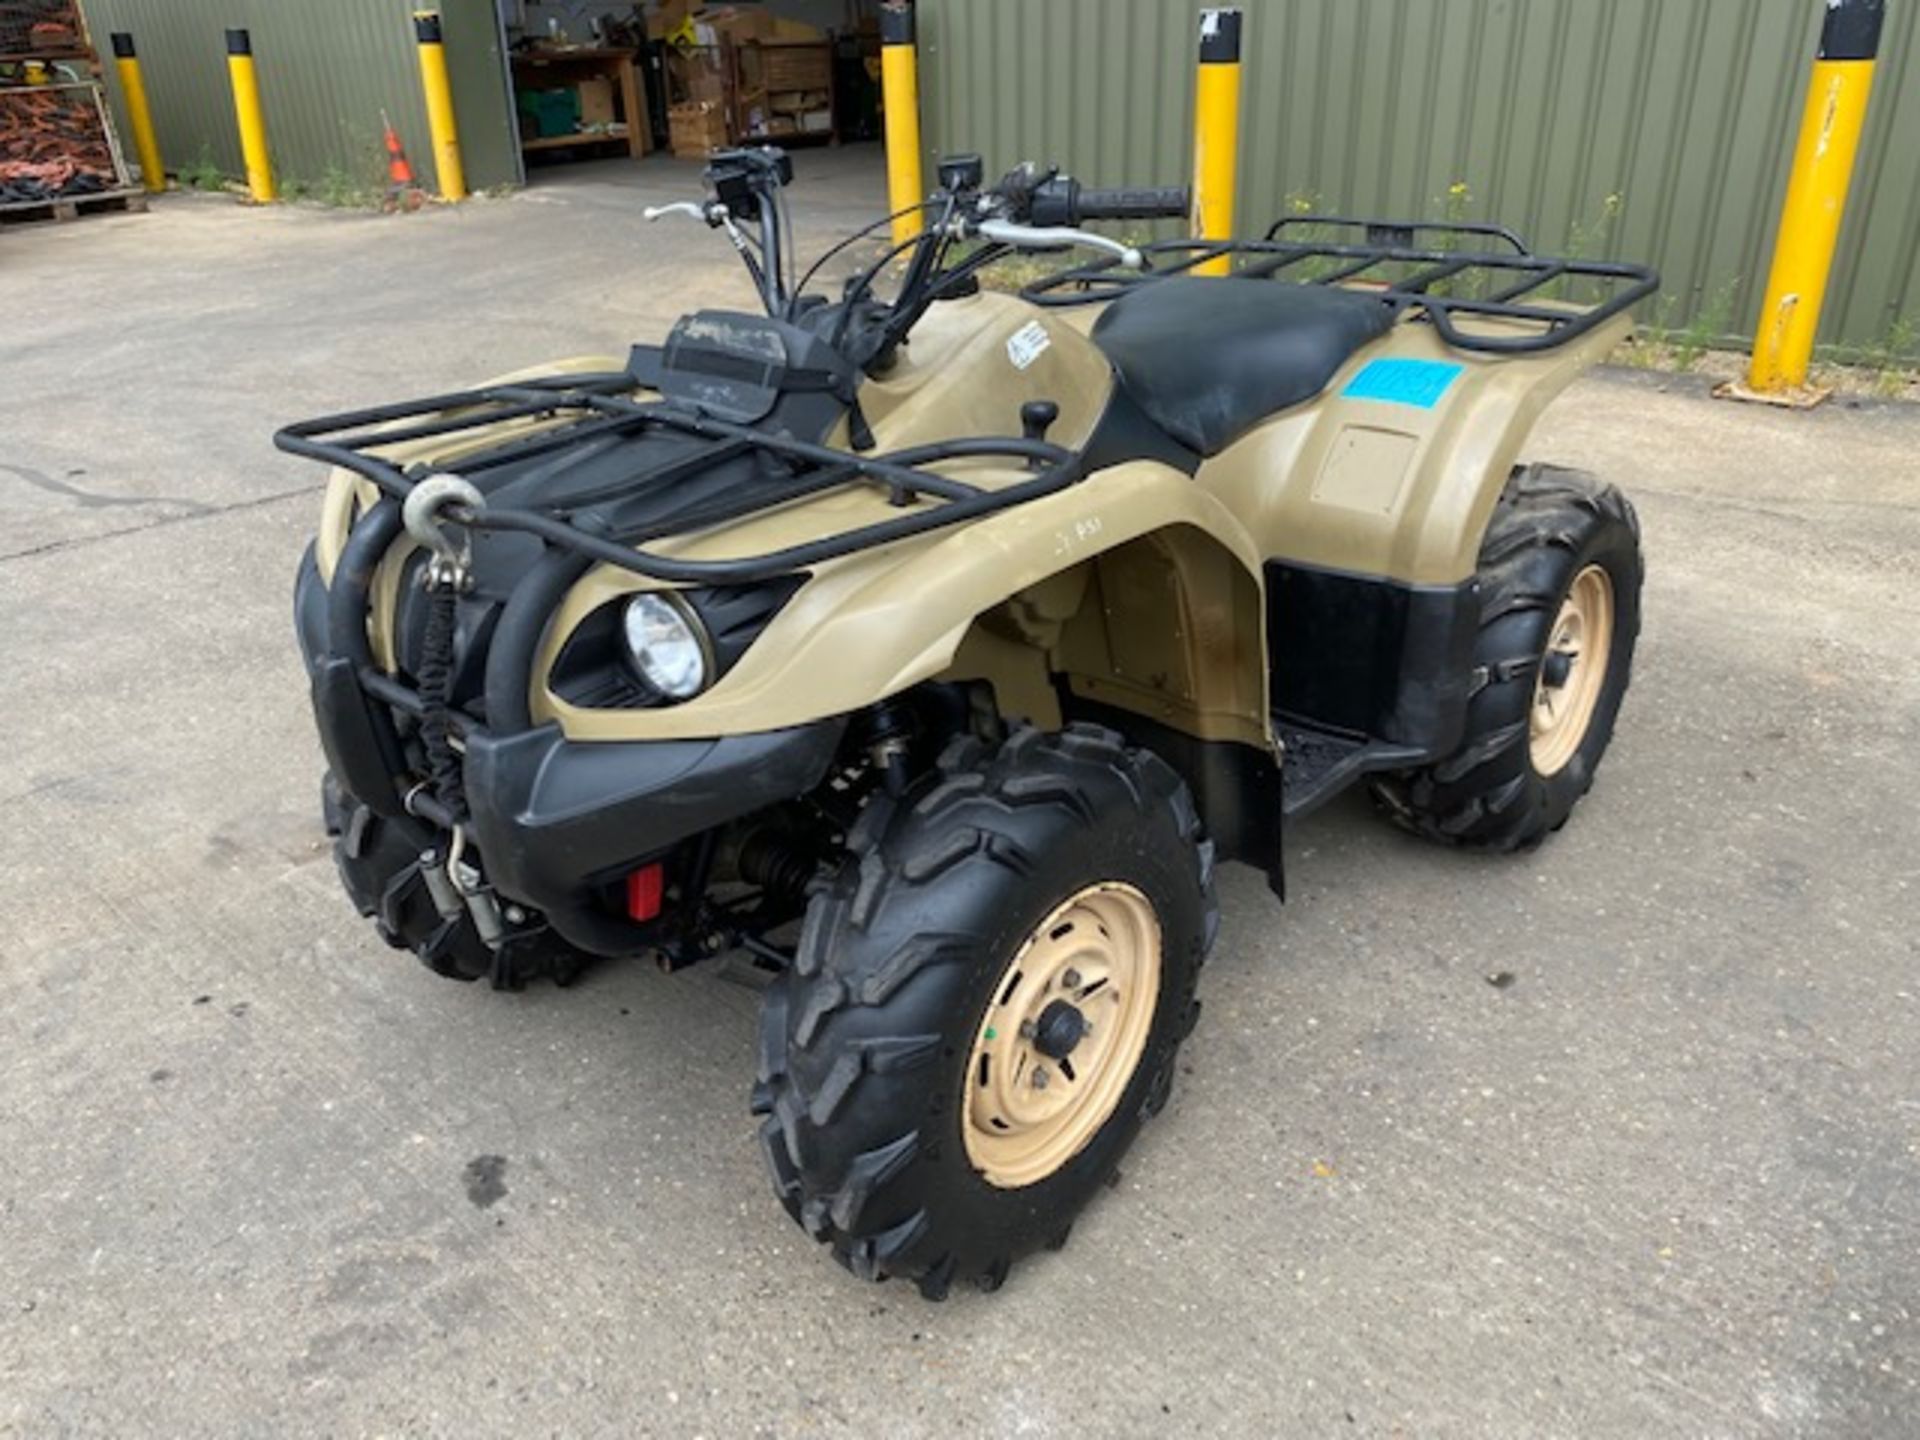 Military Specification Yamaha Grizzly 450 4 x 4 ATV Quad Bike ONLY 5,539Km!!! - Image 3 of 26